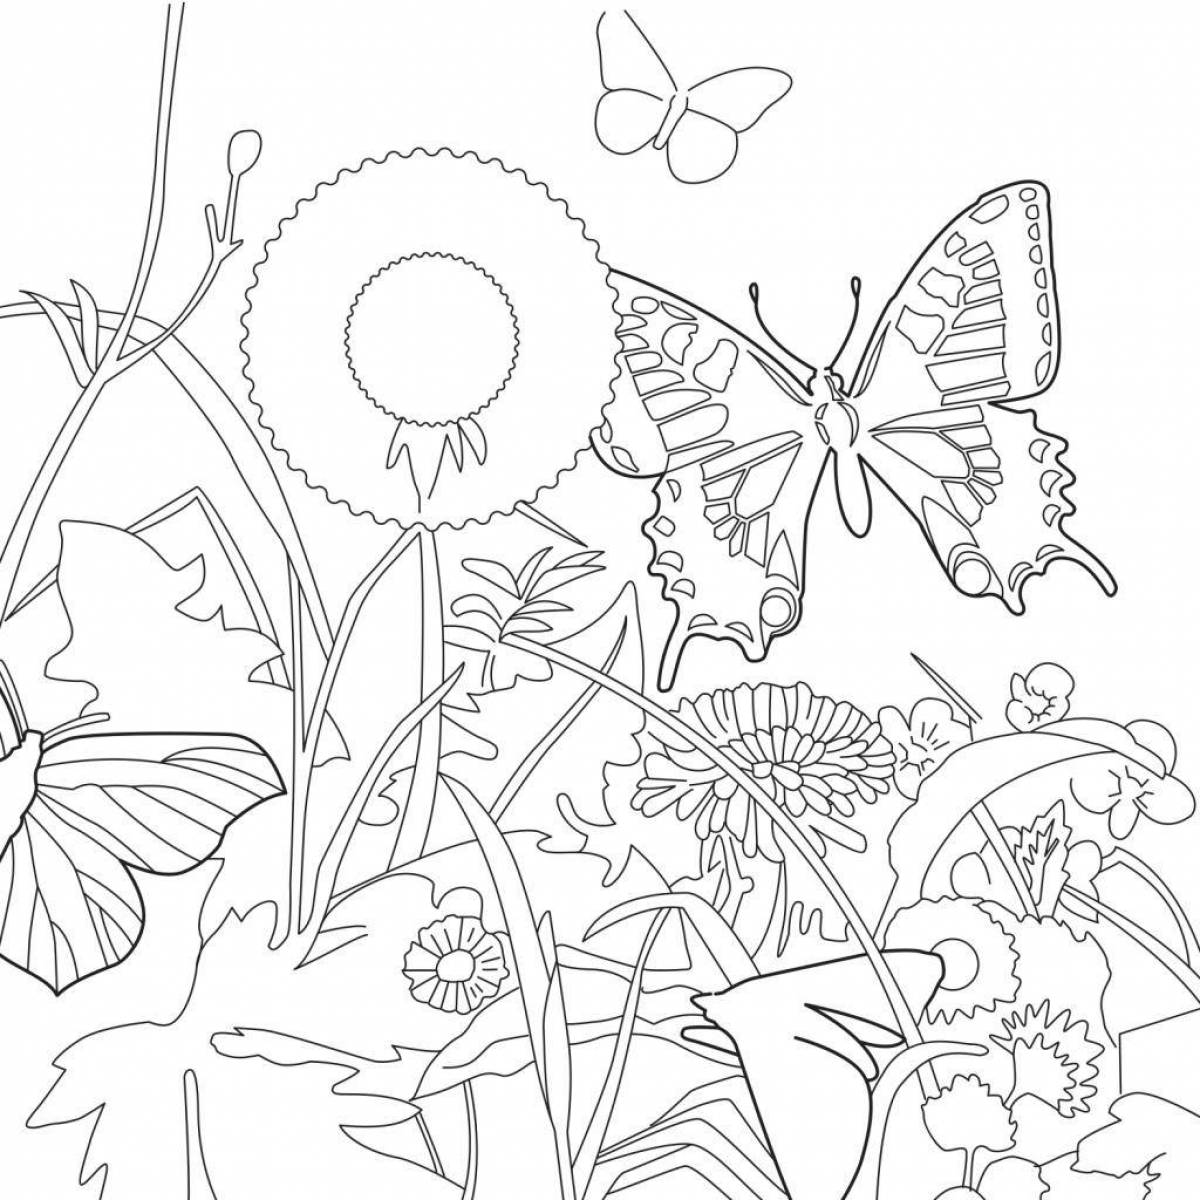 Coloring page glorious meadow for children